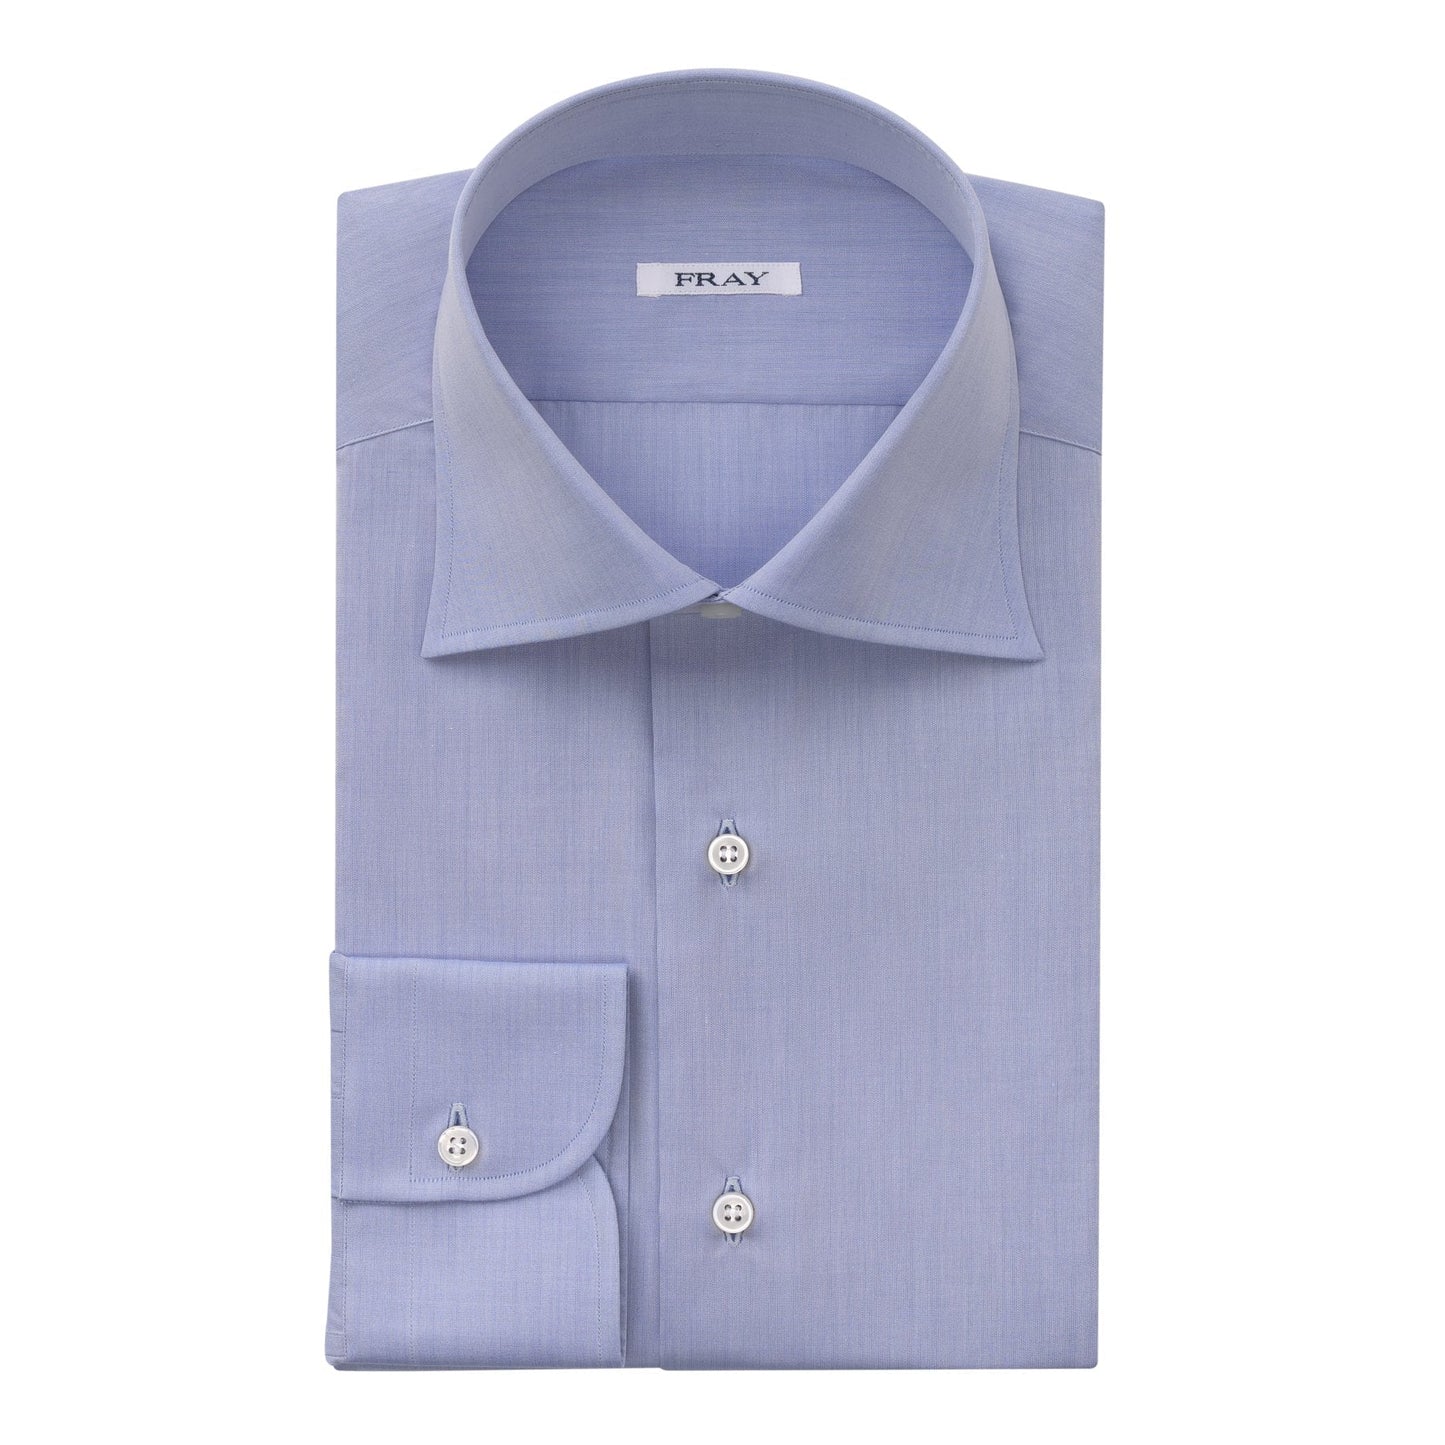 Fray Classic Cotton Shirt in Light Blue - SARTALE